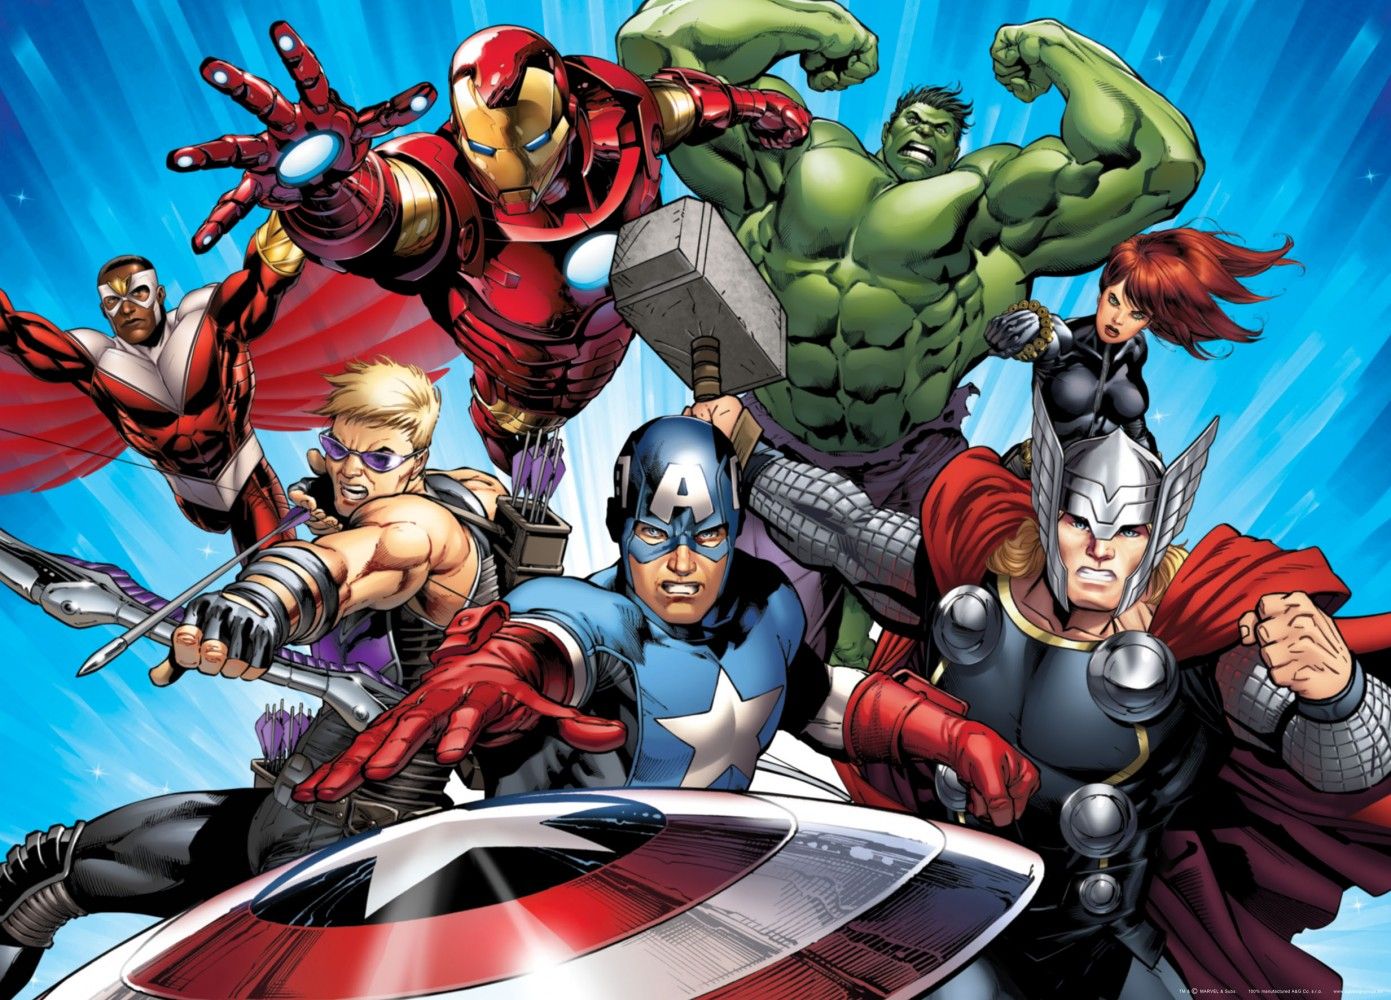 Free download XXL poster wall mural wallpaper Marvel The Avengers